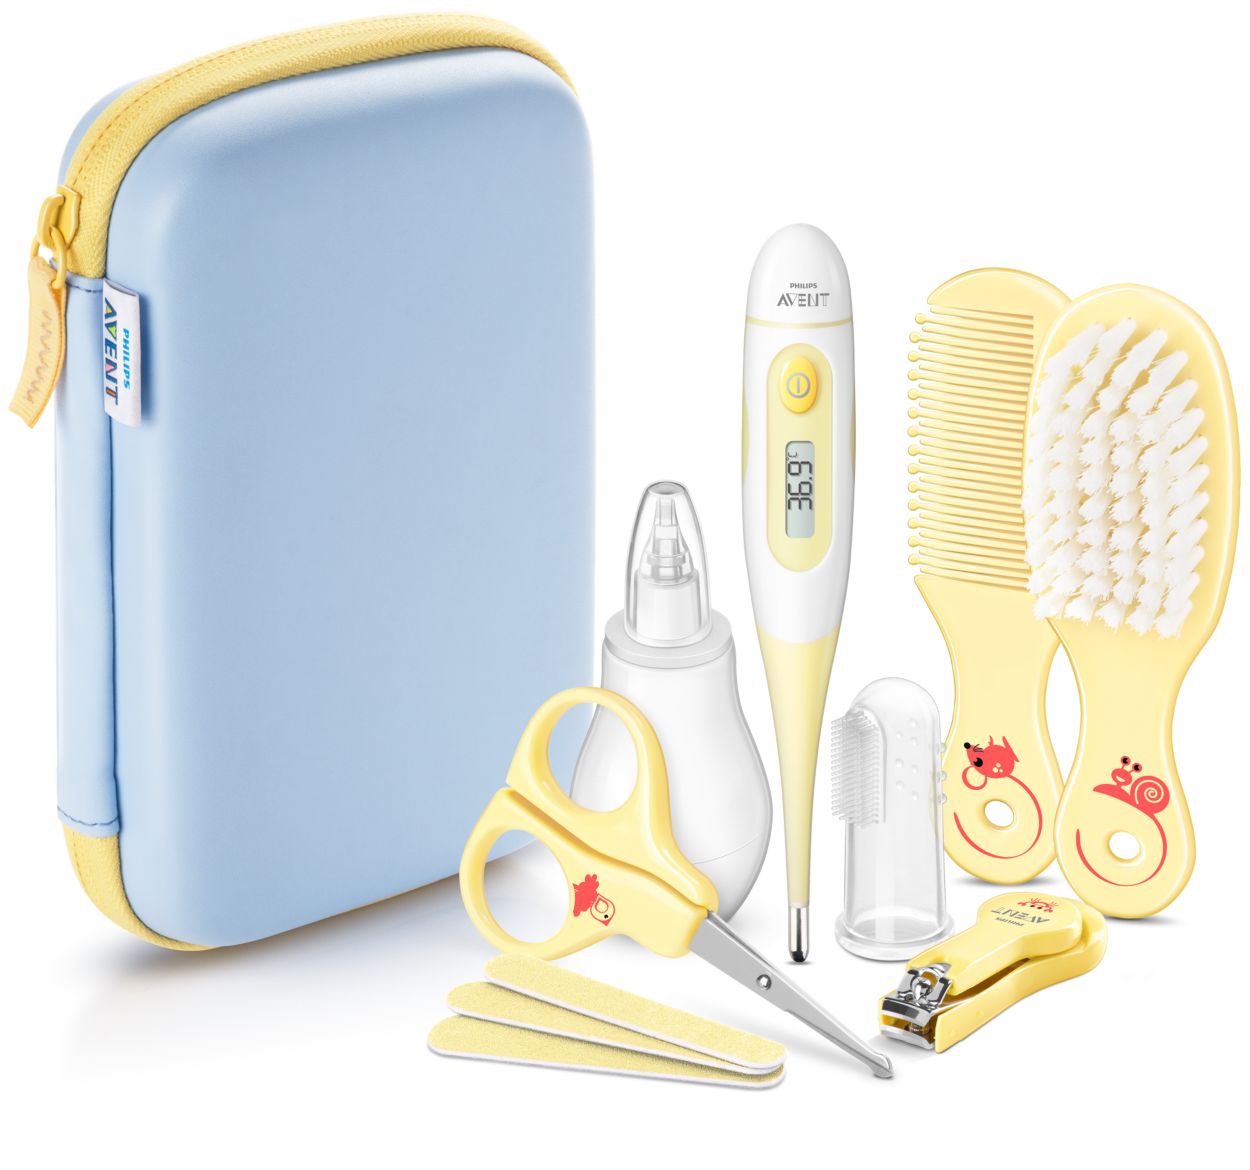 My first baby care set